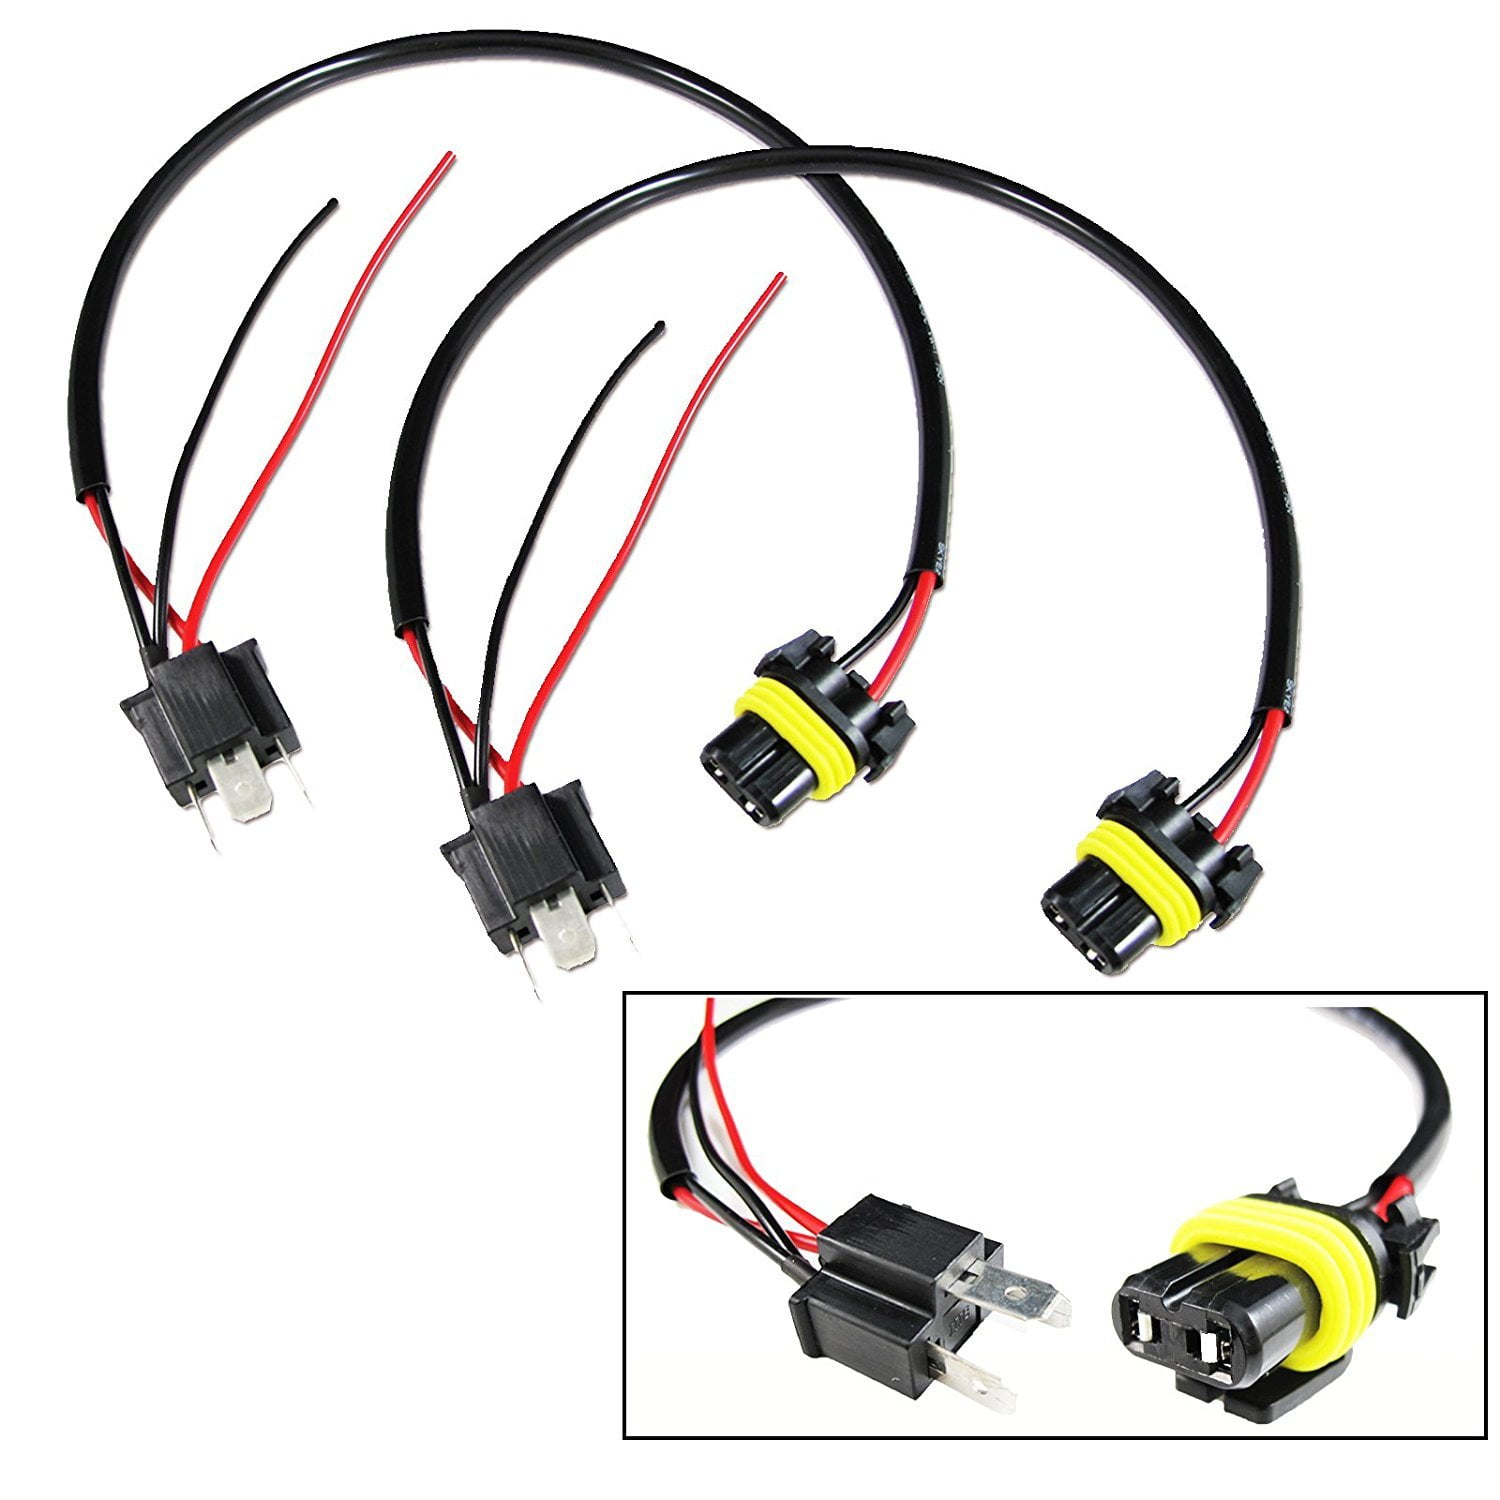 2 NEW H4 Female Headlight Wire Harness Connector Wiring plug socket 14G